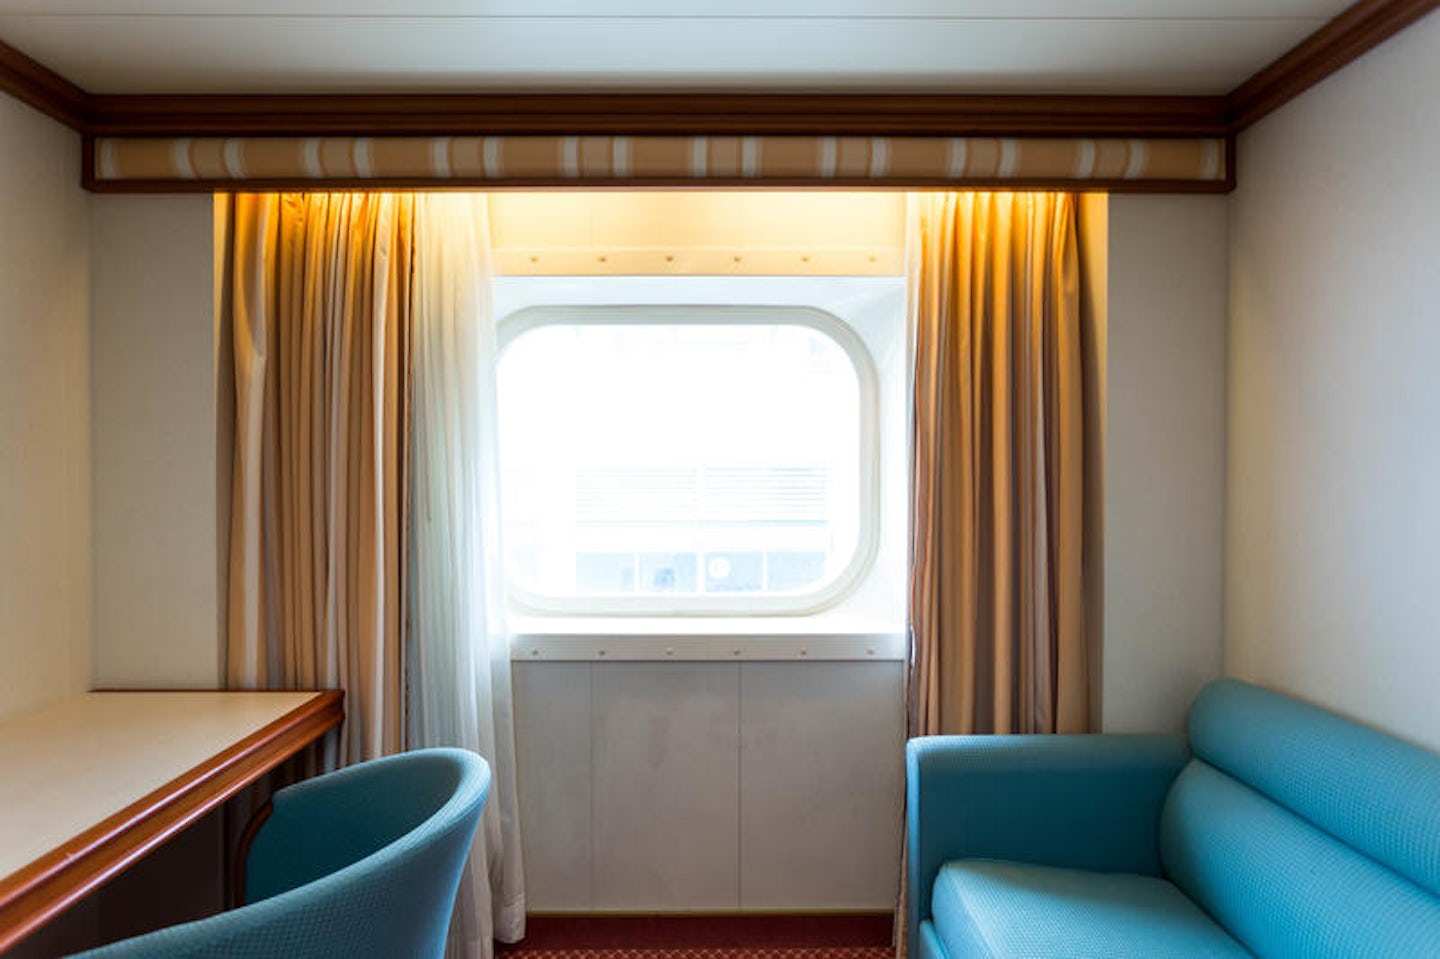 The Ocean-View Cabin on Island Princess